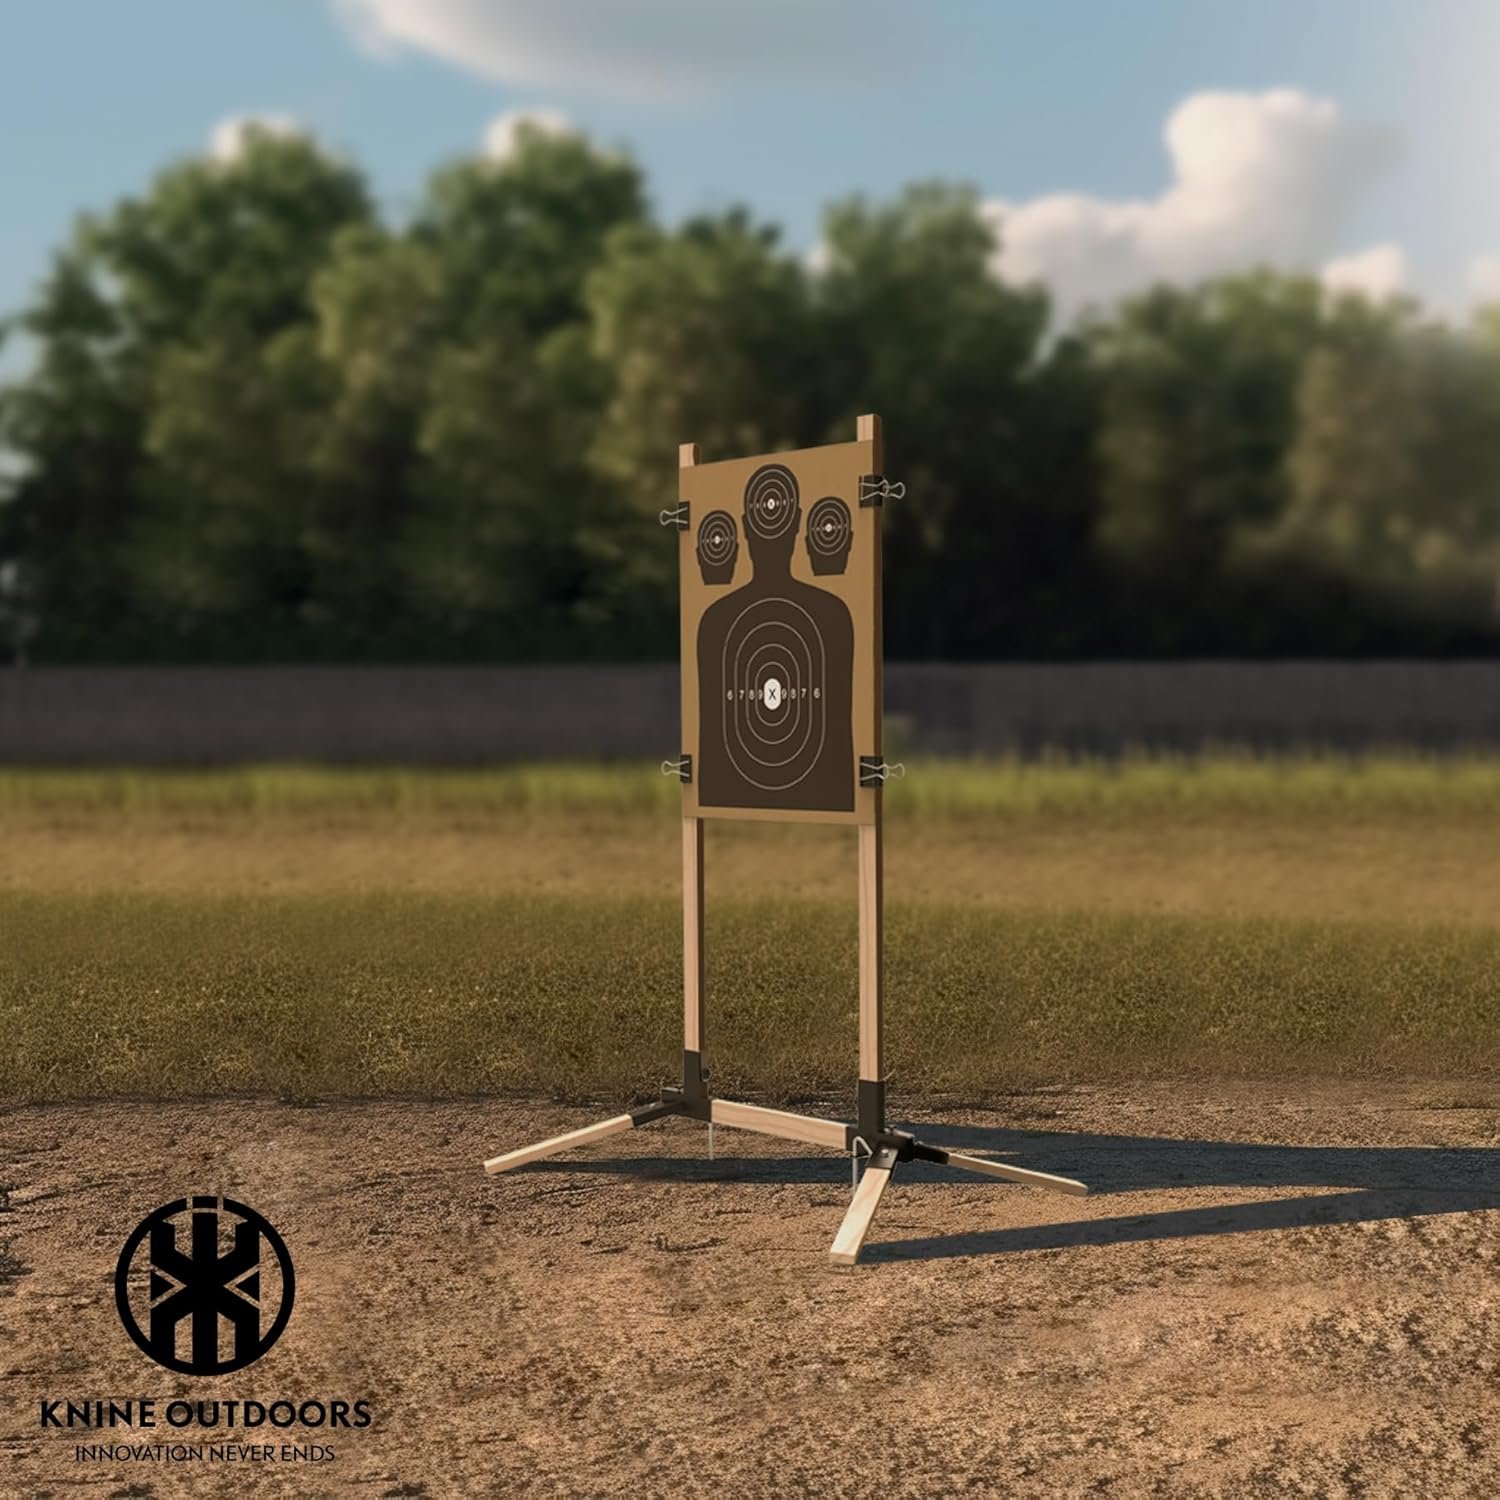 KNINE OUTDOORS Shooting Target Stand Base review